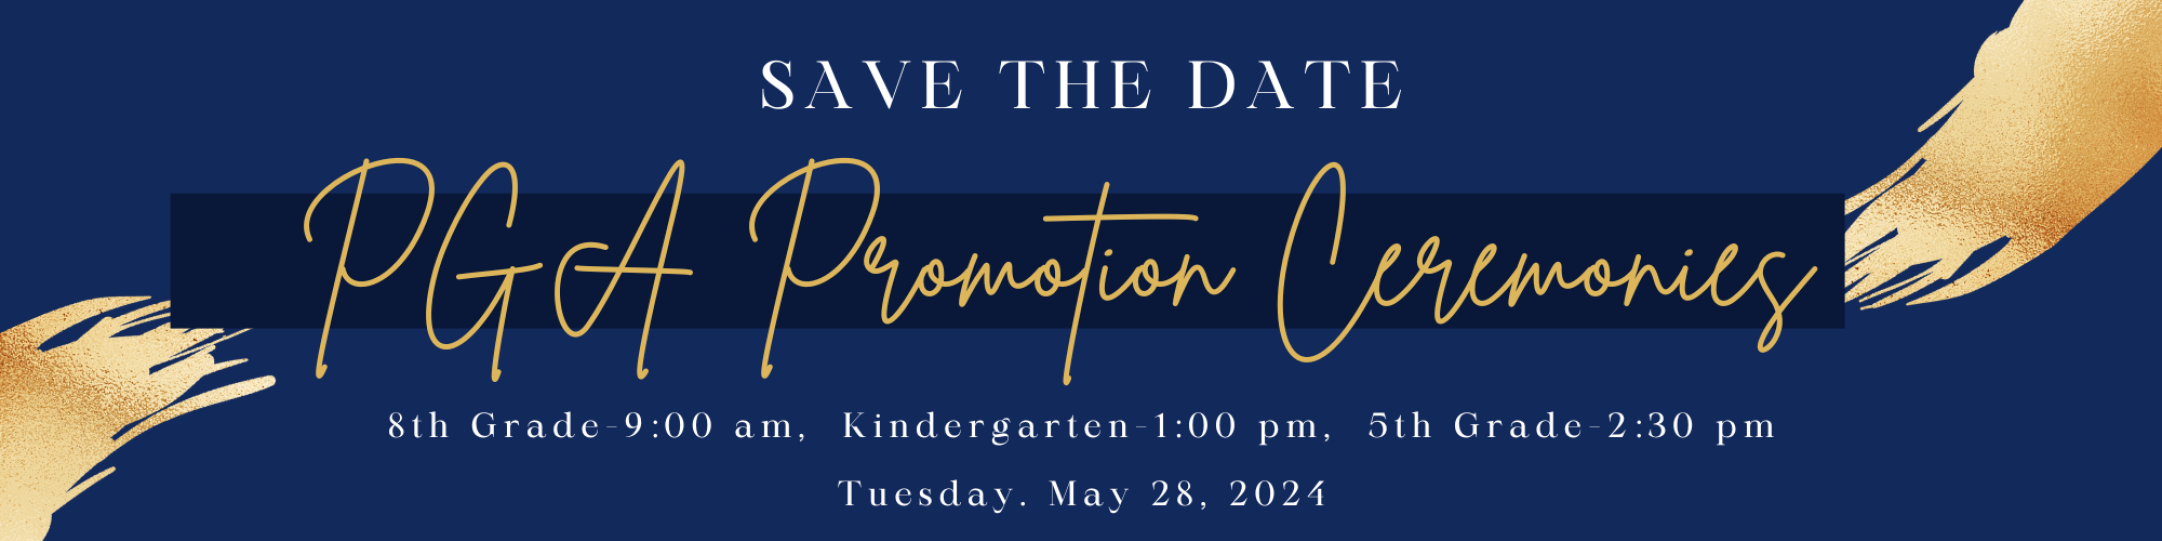 Save the Date Promotion Ceremonies